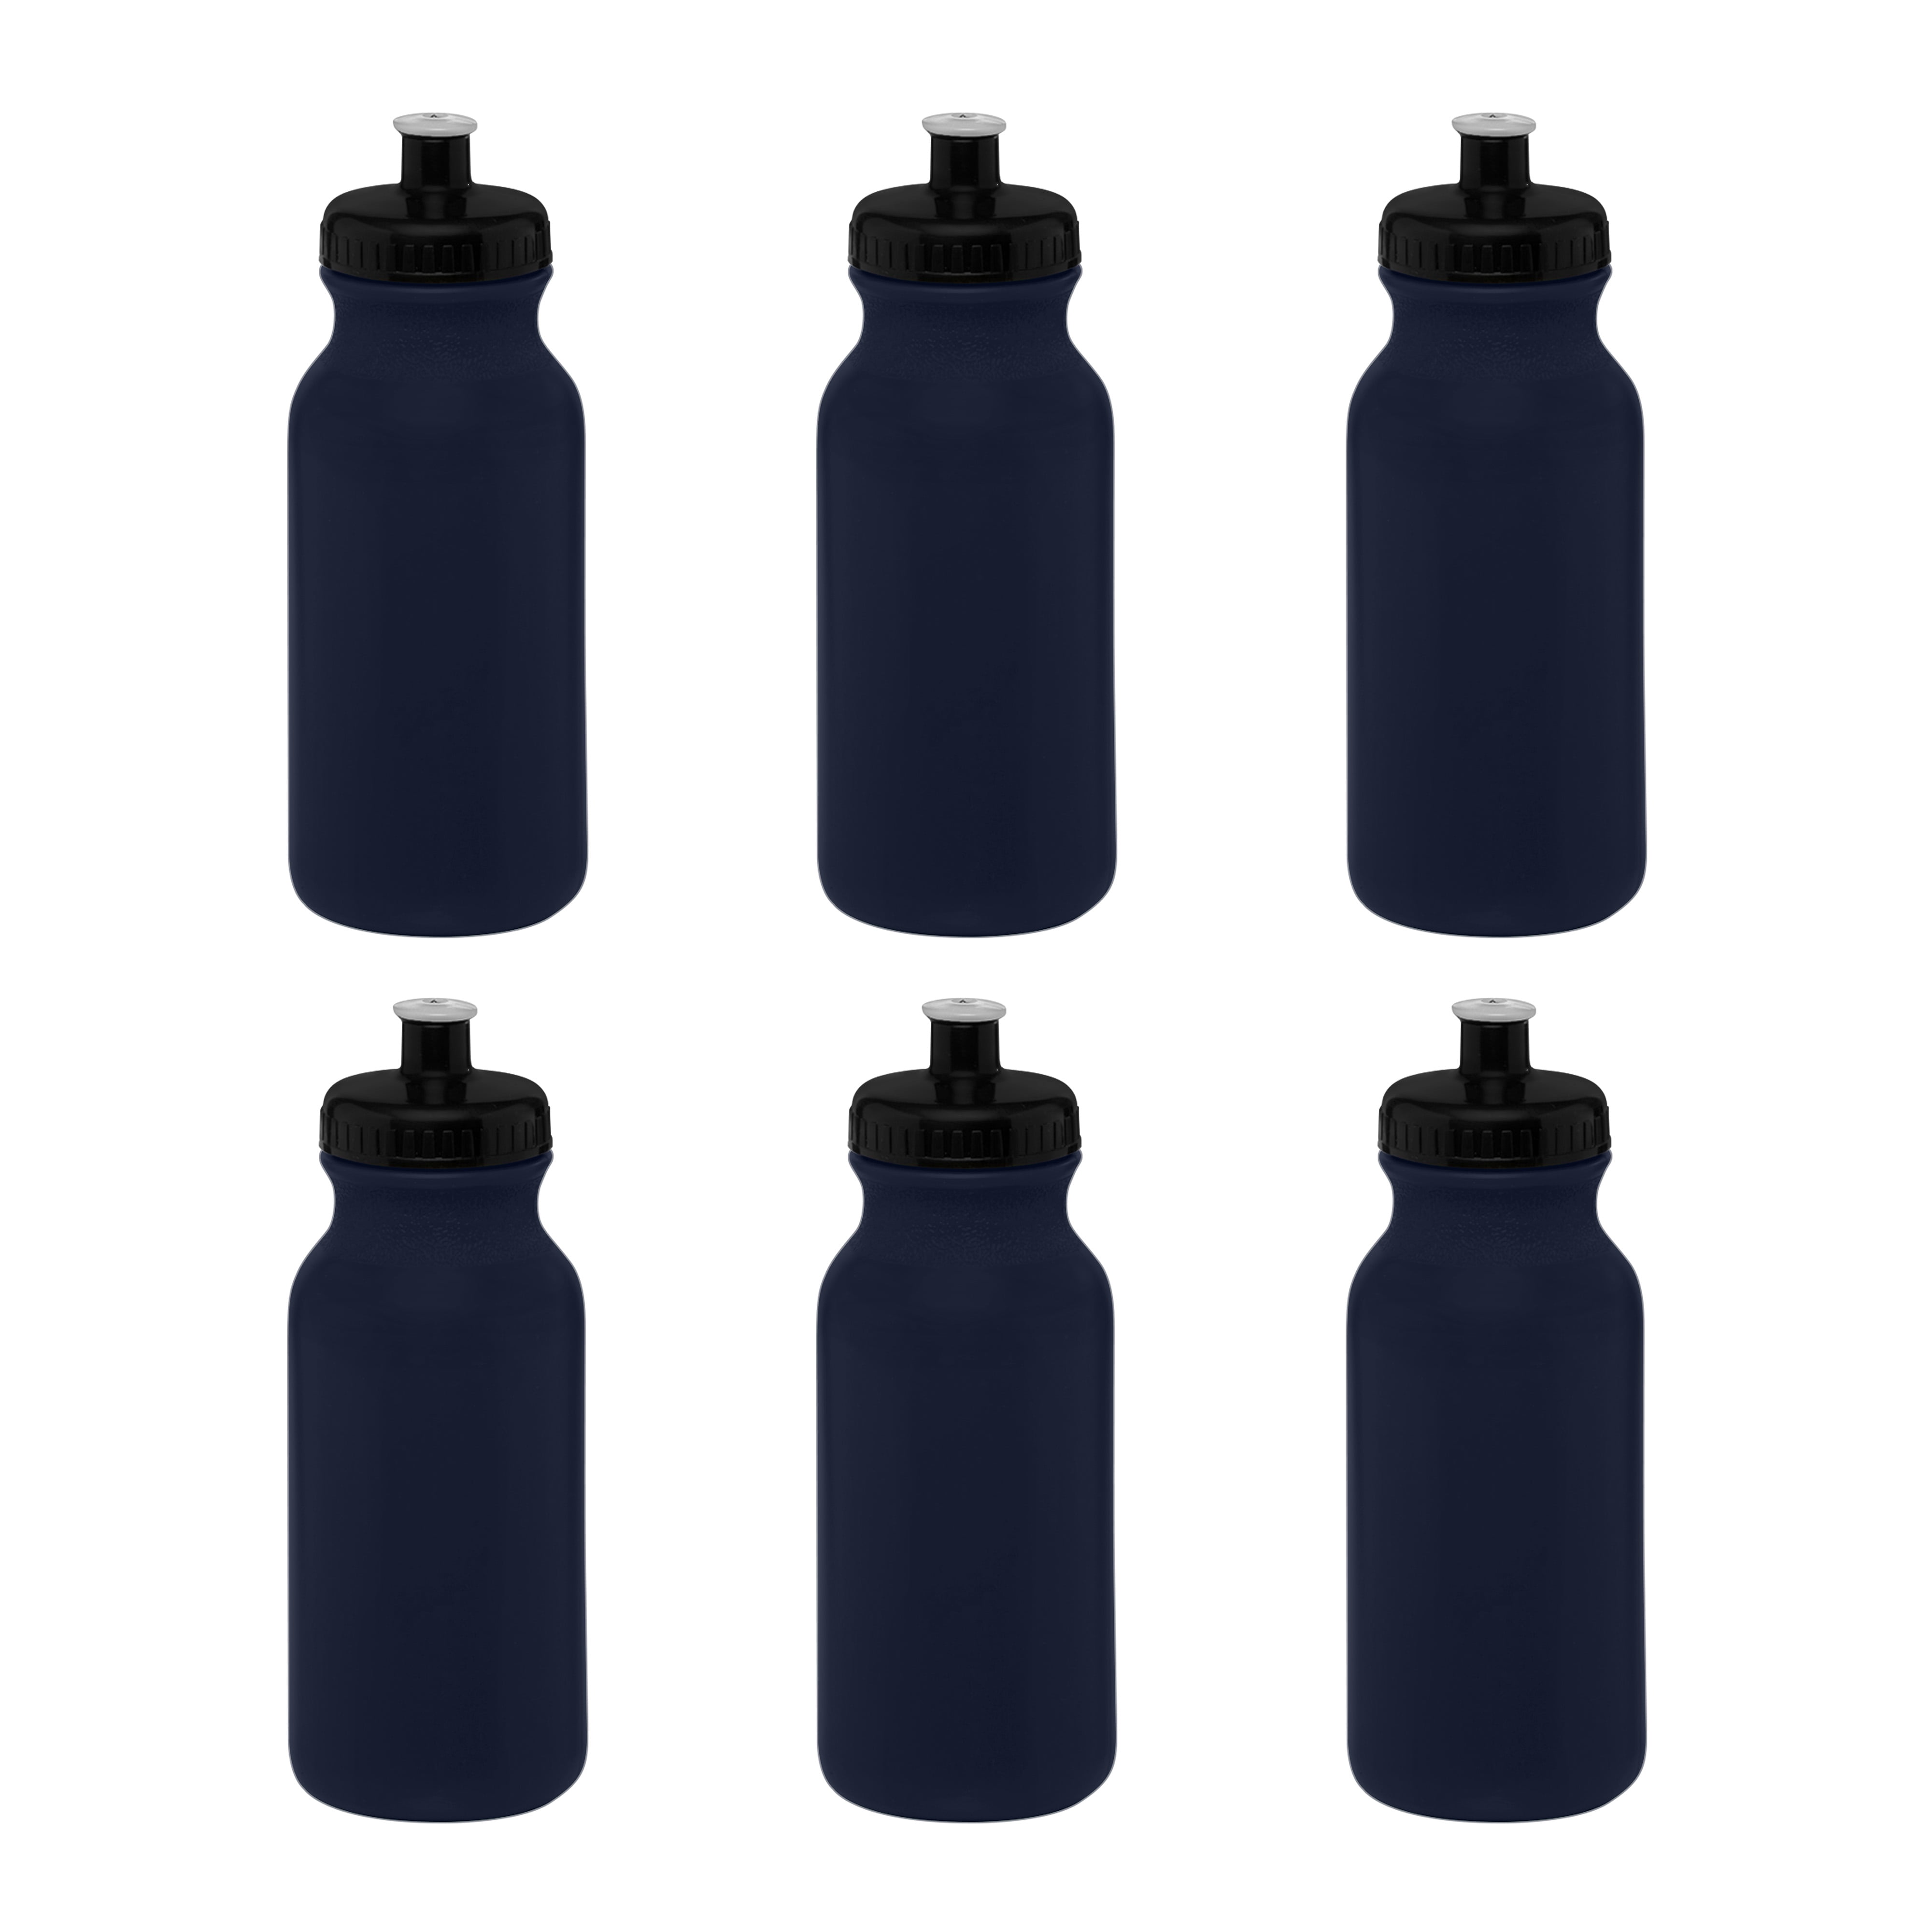 Water Bottle with Push Cap 20 oz. Set of 6, Bulk Pack - Reusable, Leak  Proof, Perfect for Gym, Hiking, Camping, Outdoor Sports - Black 